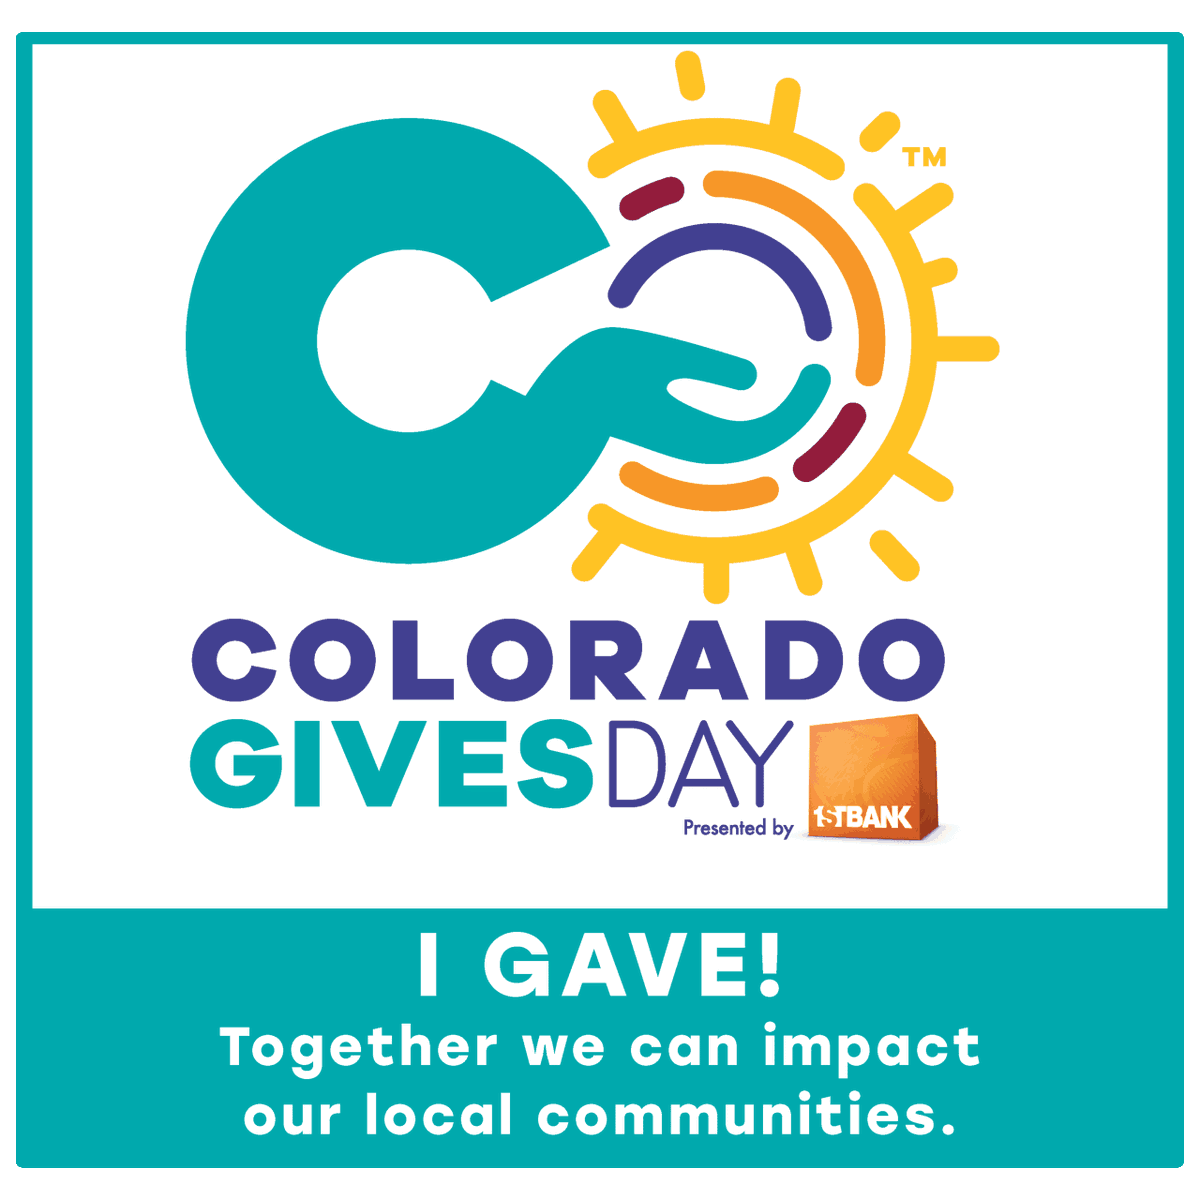 Just a few hours left for @ColoradoGives Day!  Find your favorite community organization or non-profit in the next 2 hours to help them unlock a portion of the bonus fund pool!  Thank you for all that you do @efaa_boulder and @cprwarner @COPublicRadio